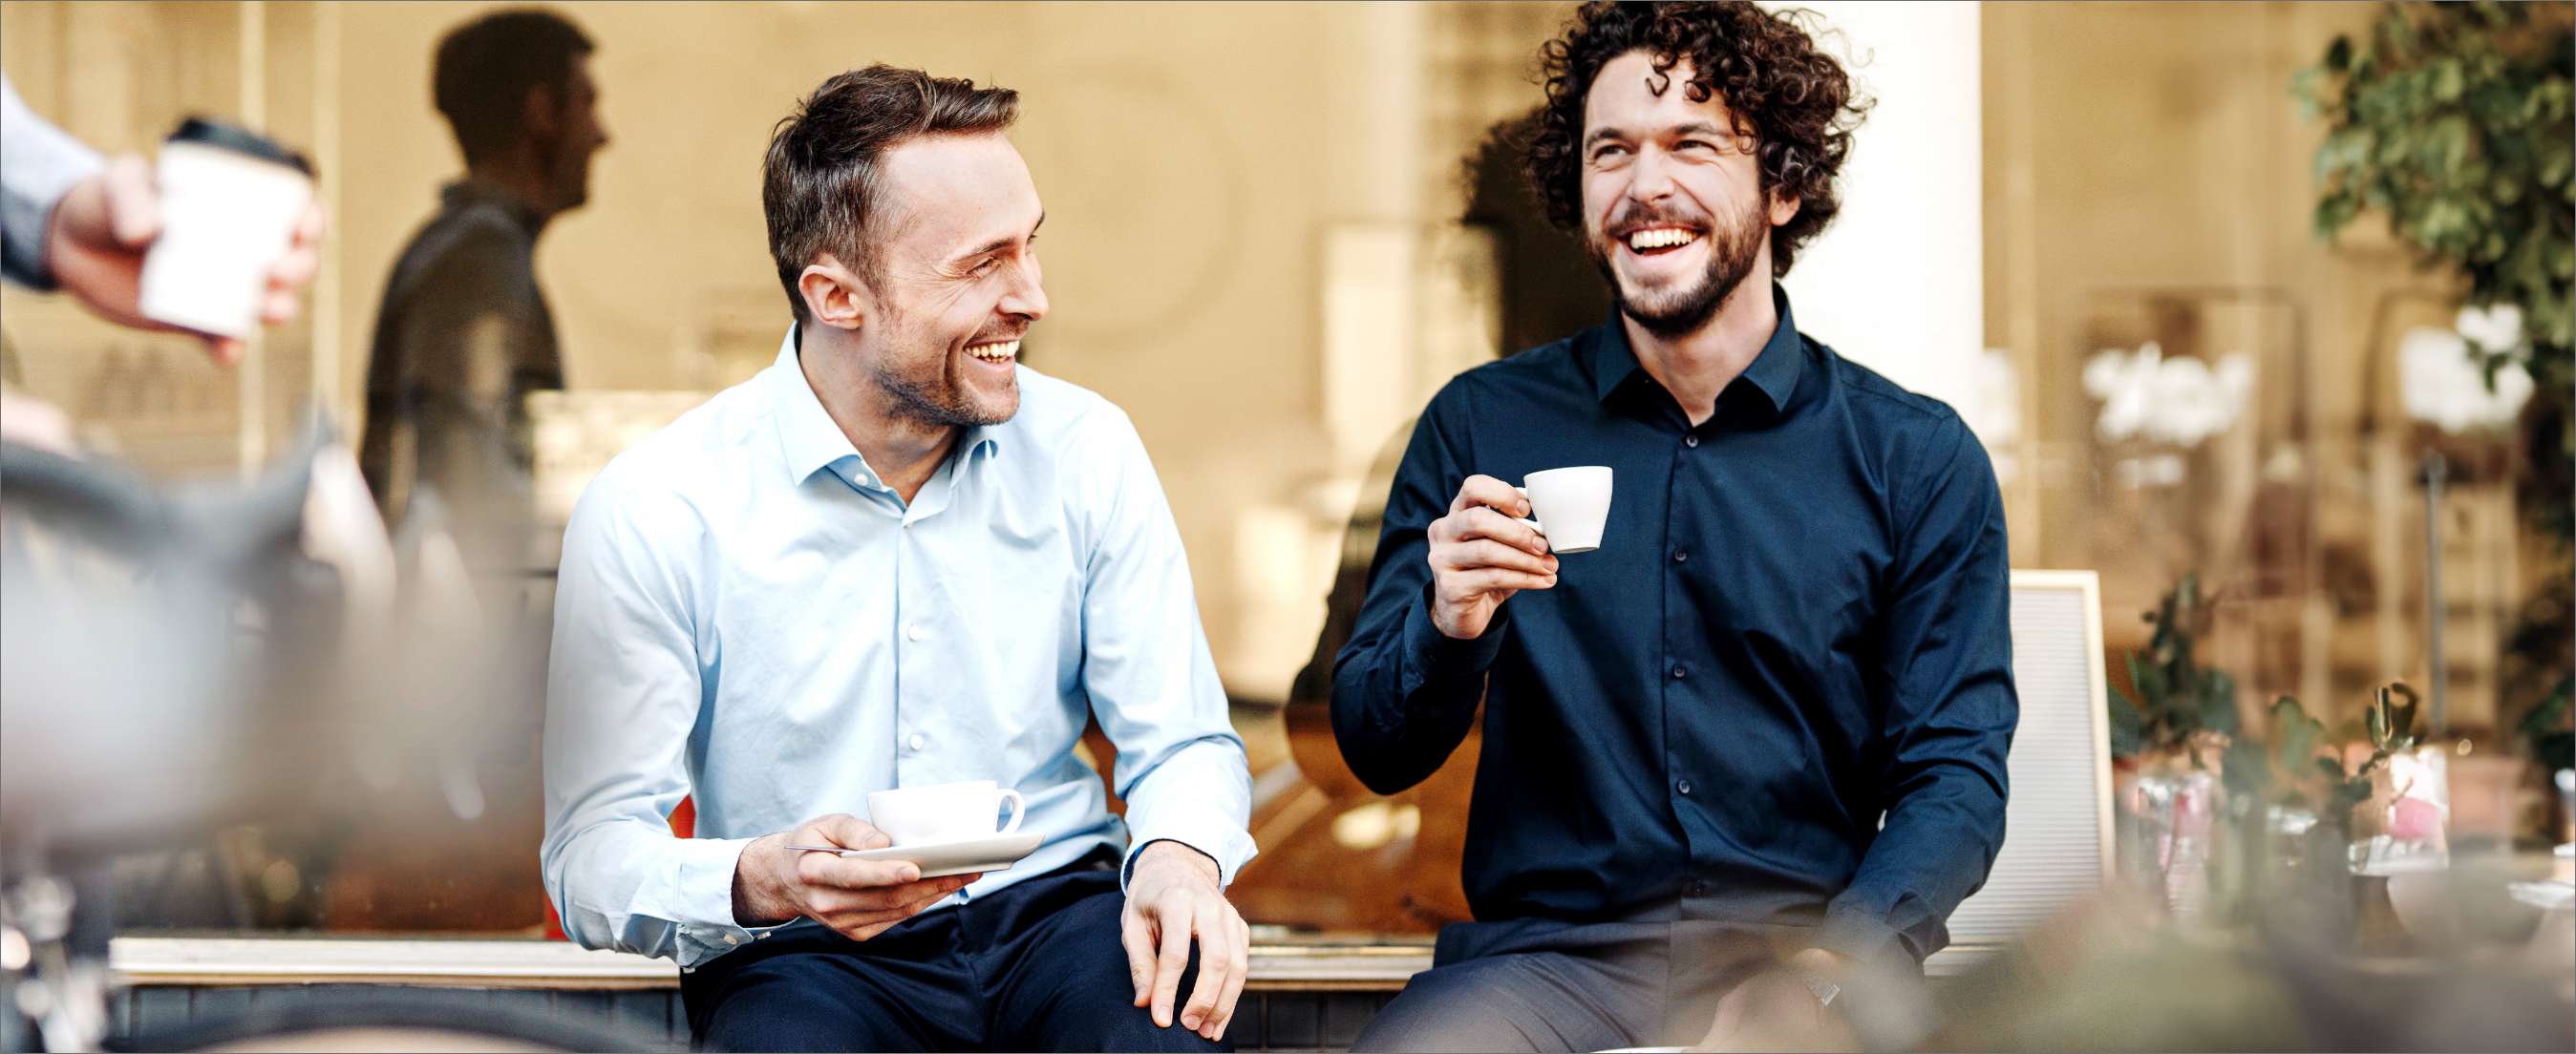 Two white men laughing outside a café, holding espresso cups.